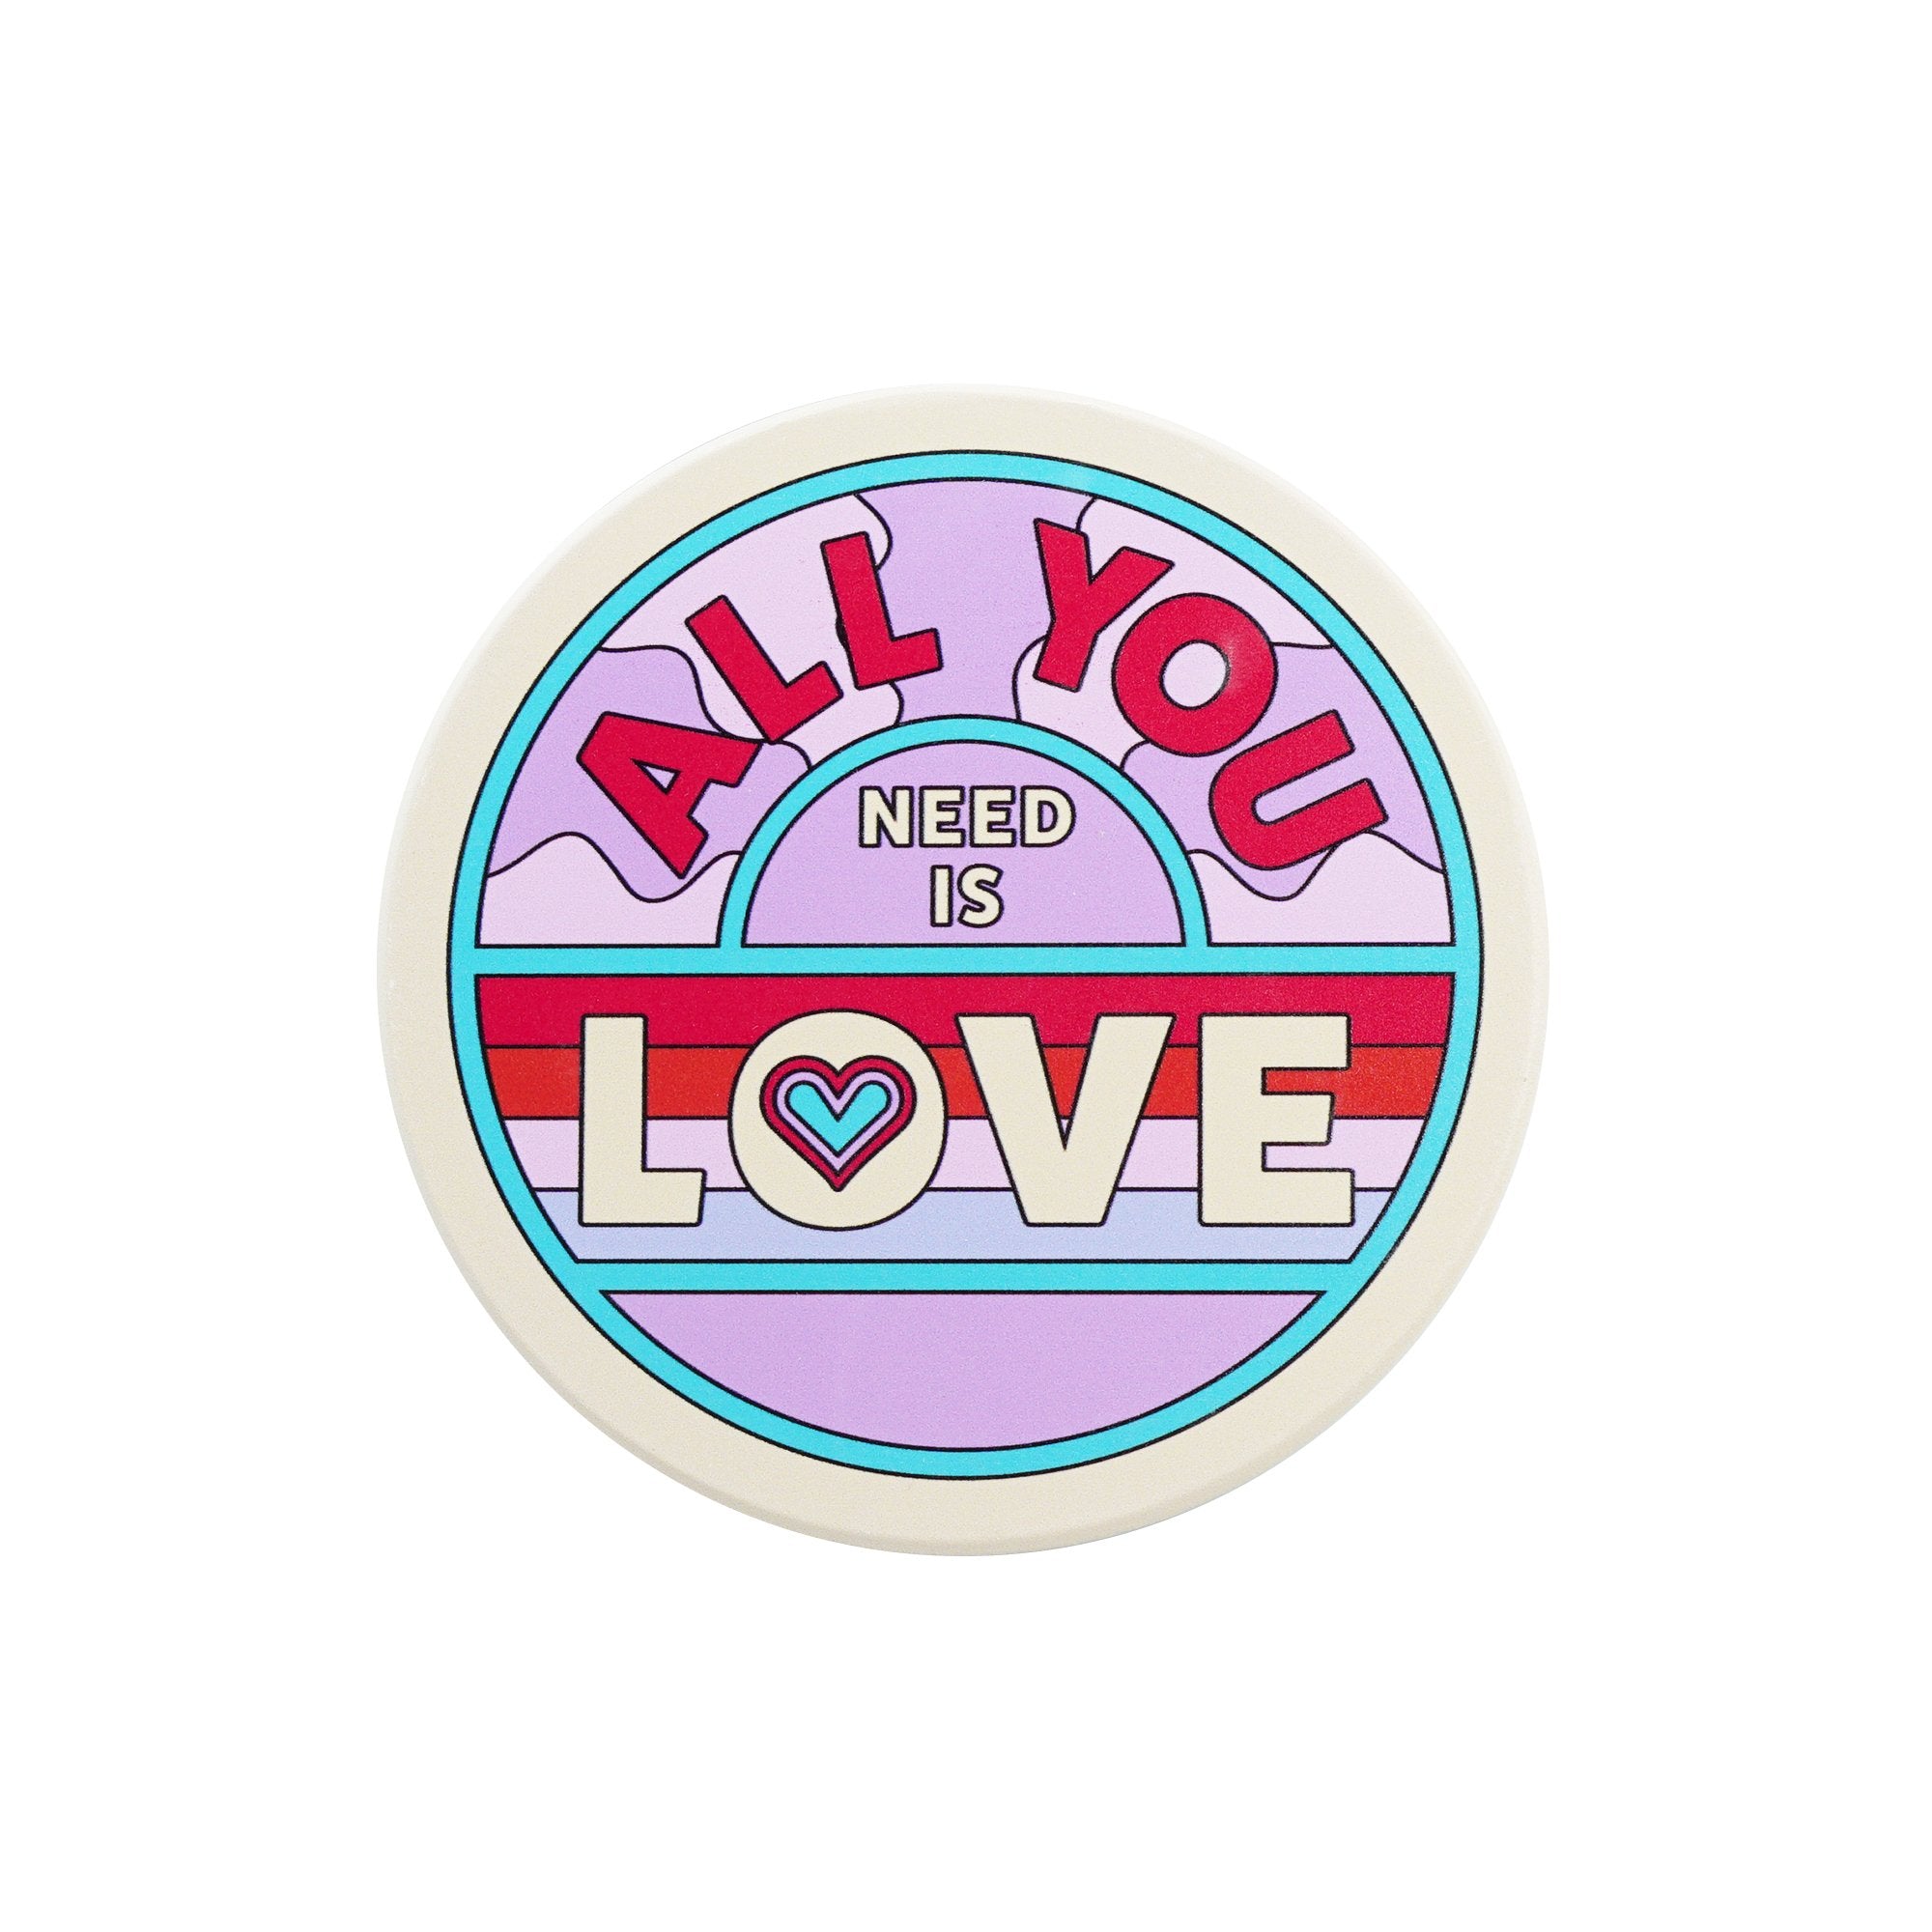 Coaster Single Ceramic - The Beatles (All You Need is Love)